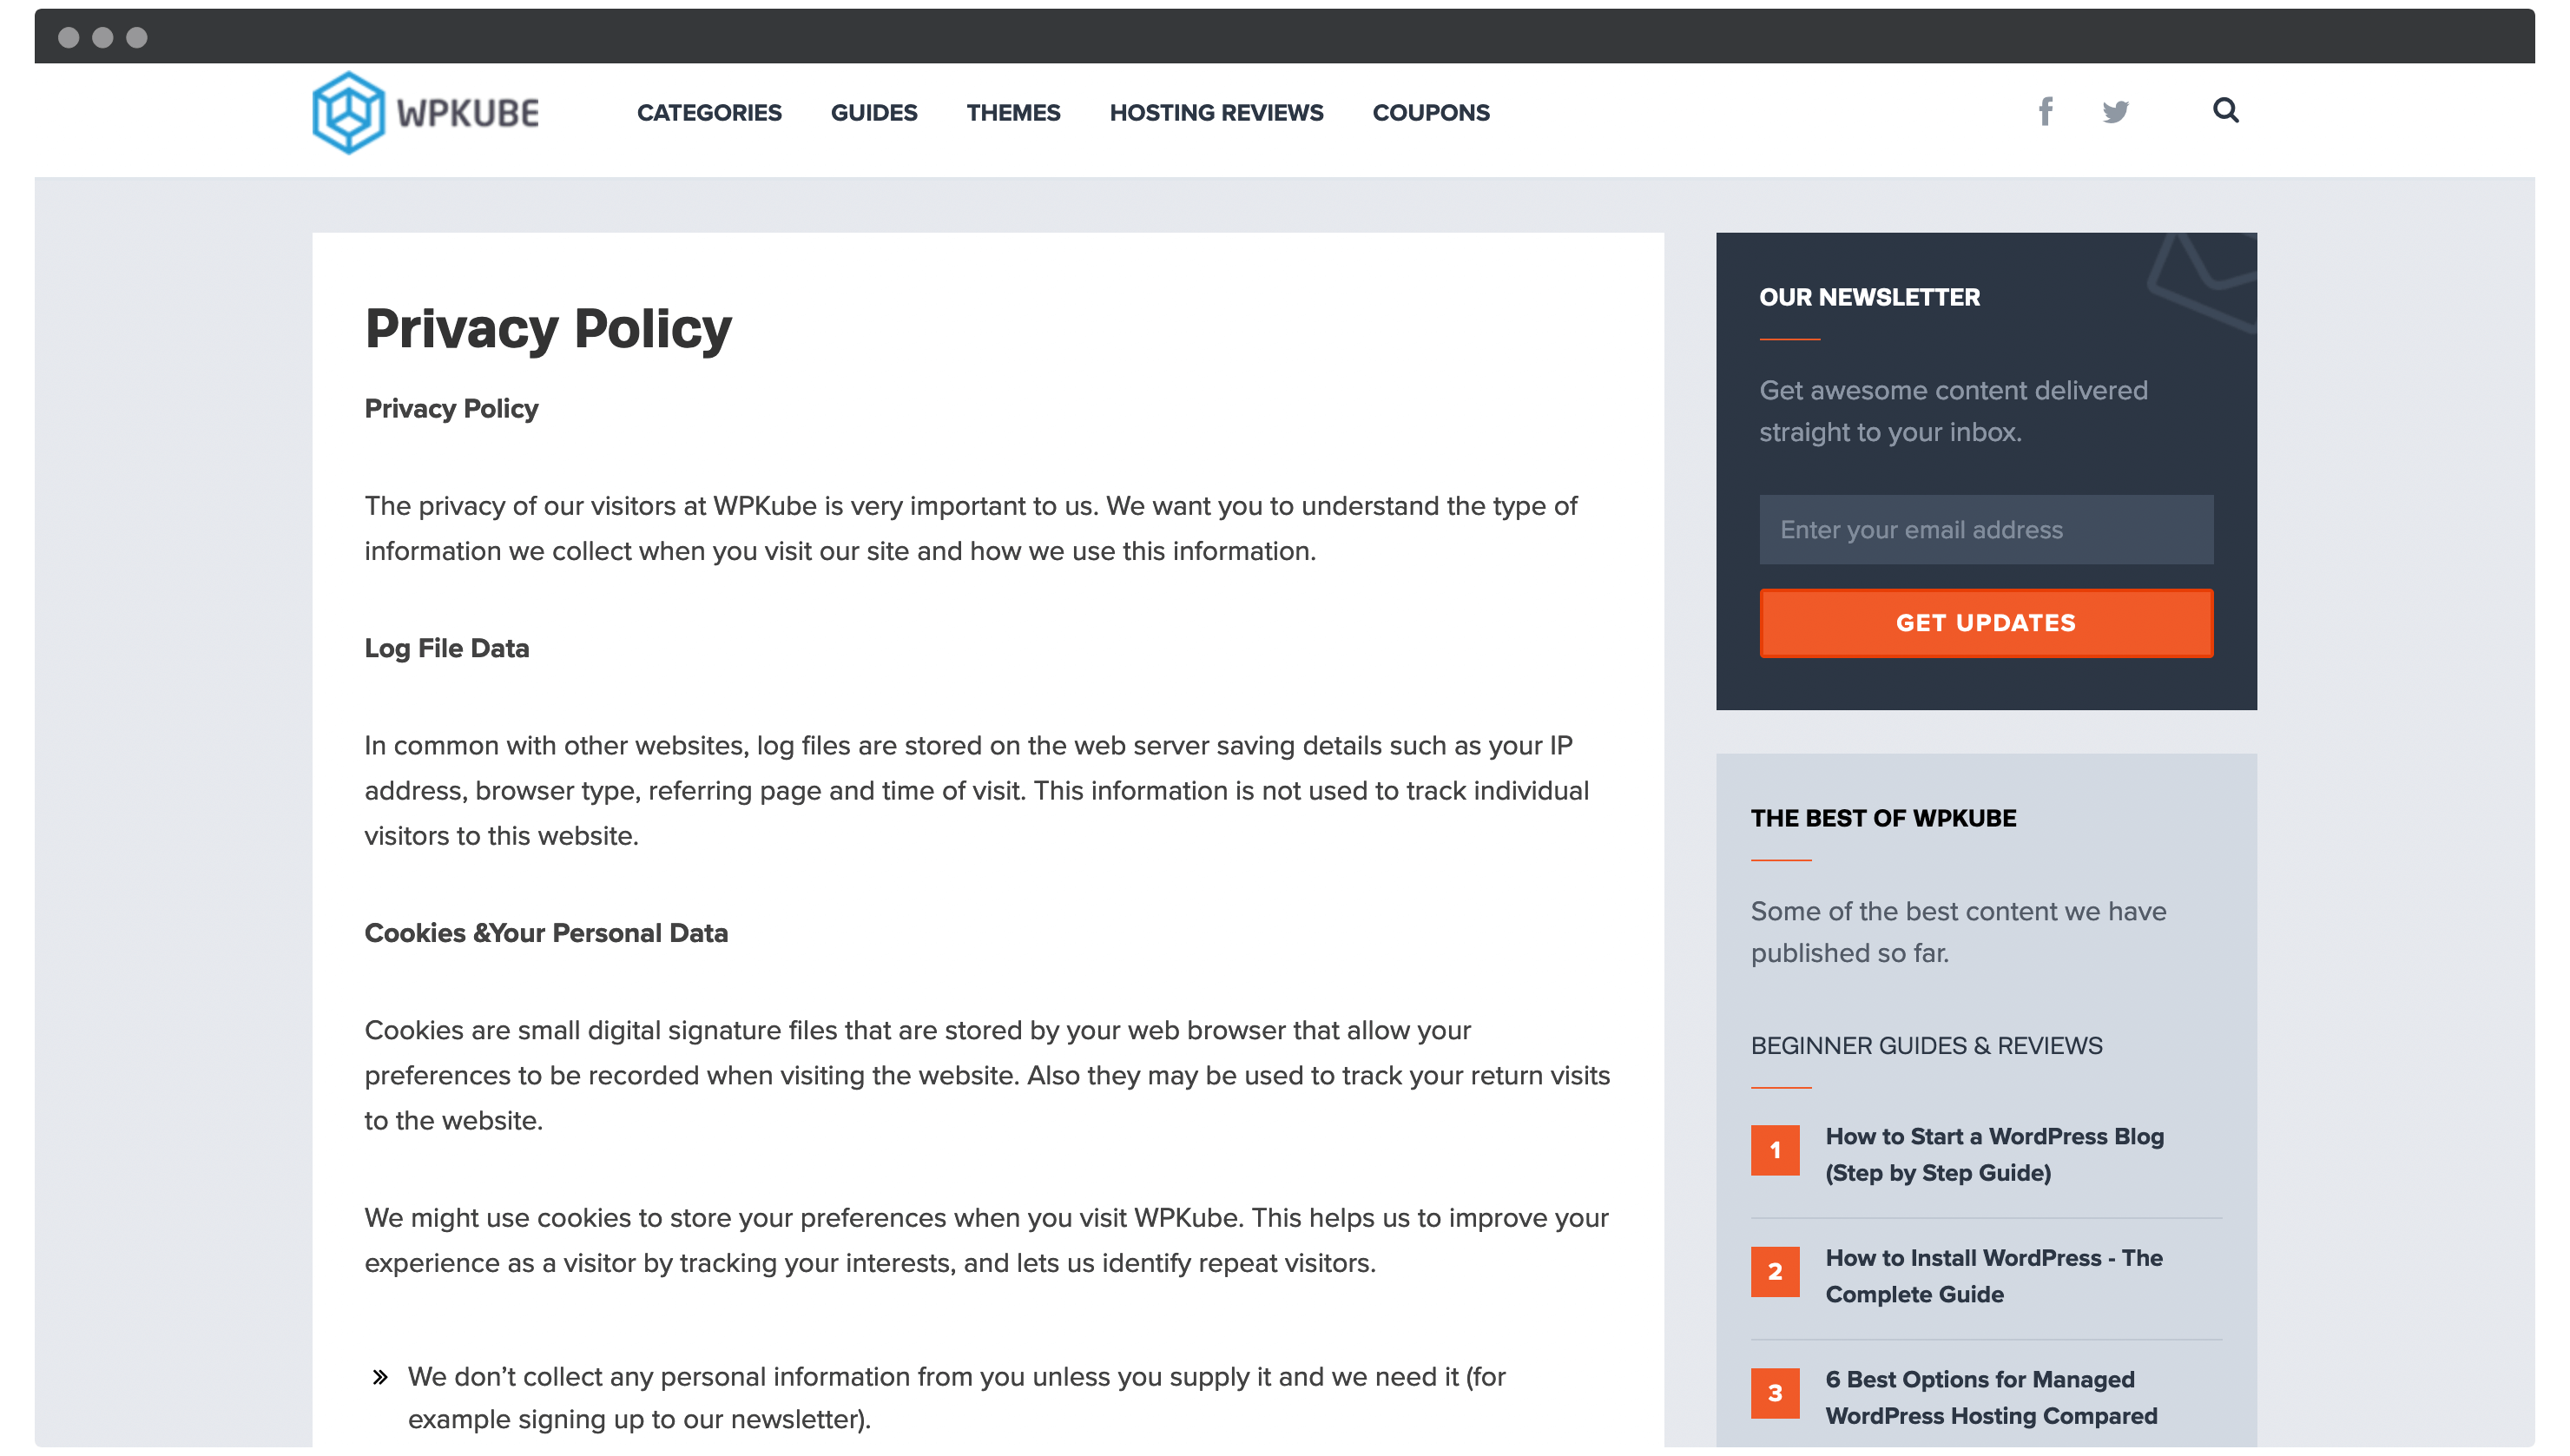 WPKube's privacy policy.